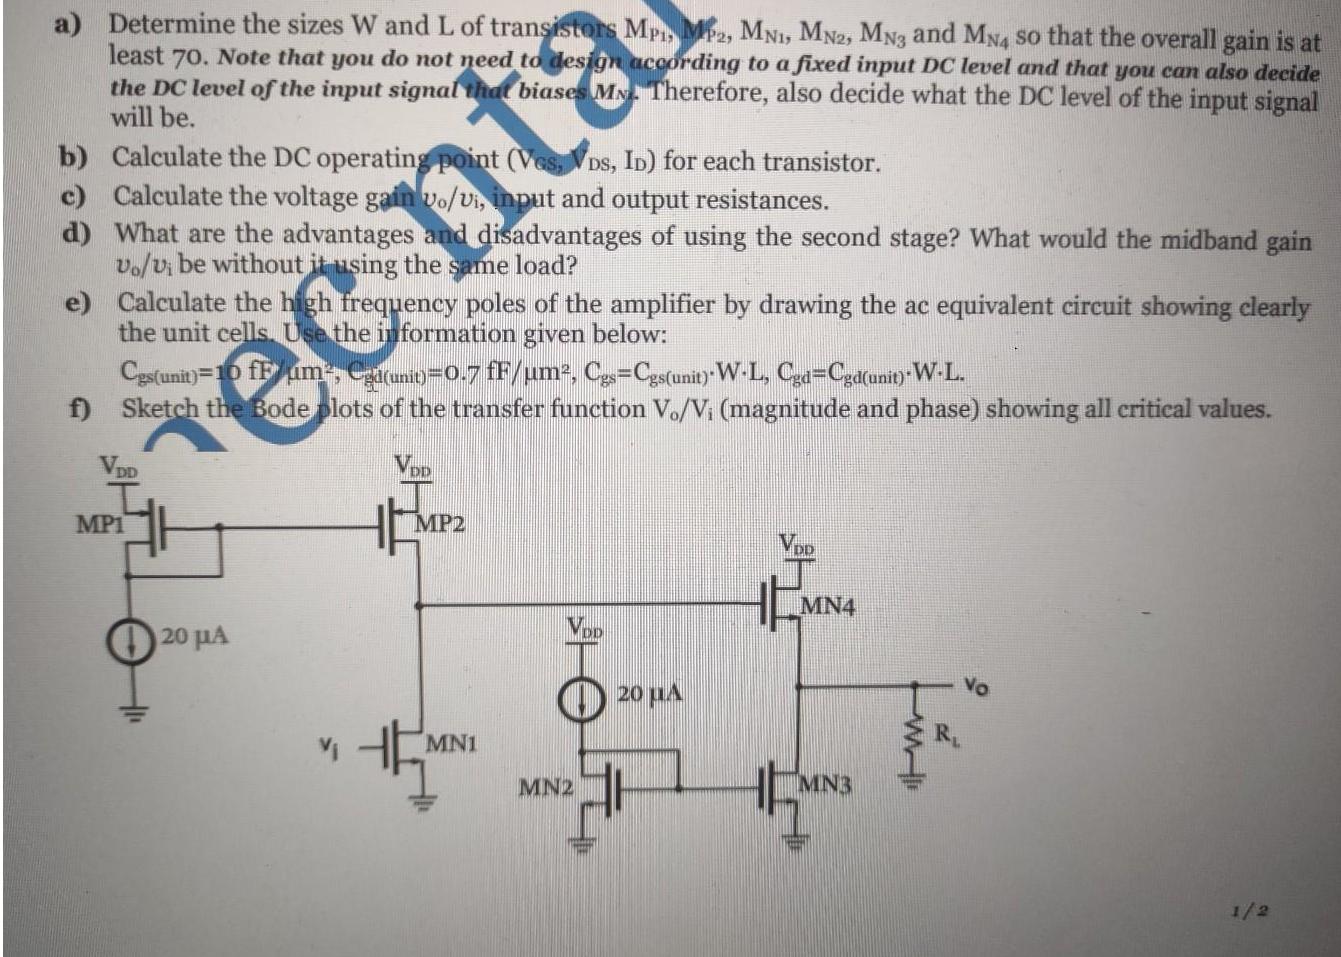 a) Determine the sizes W and L of transistors MPI, MP2, MNI, MN2, MN3 and MN4 so that the overall gain is at